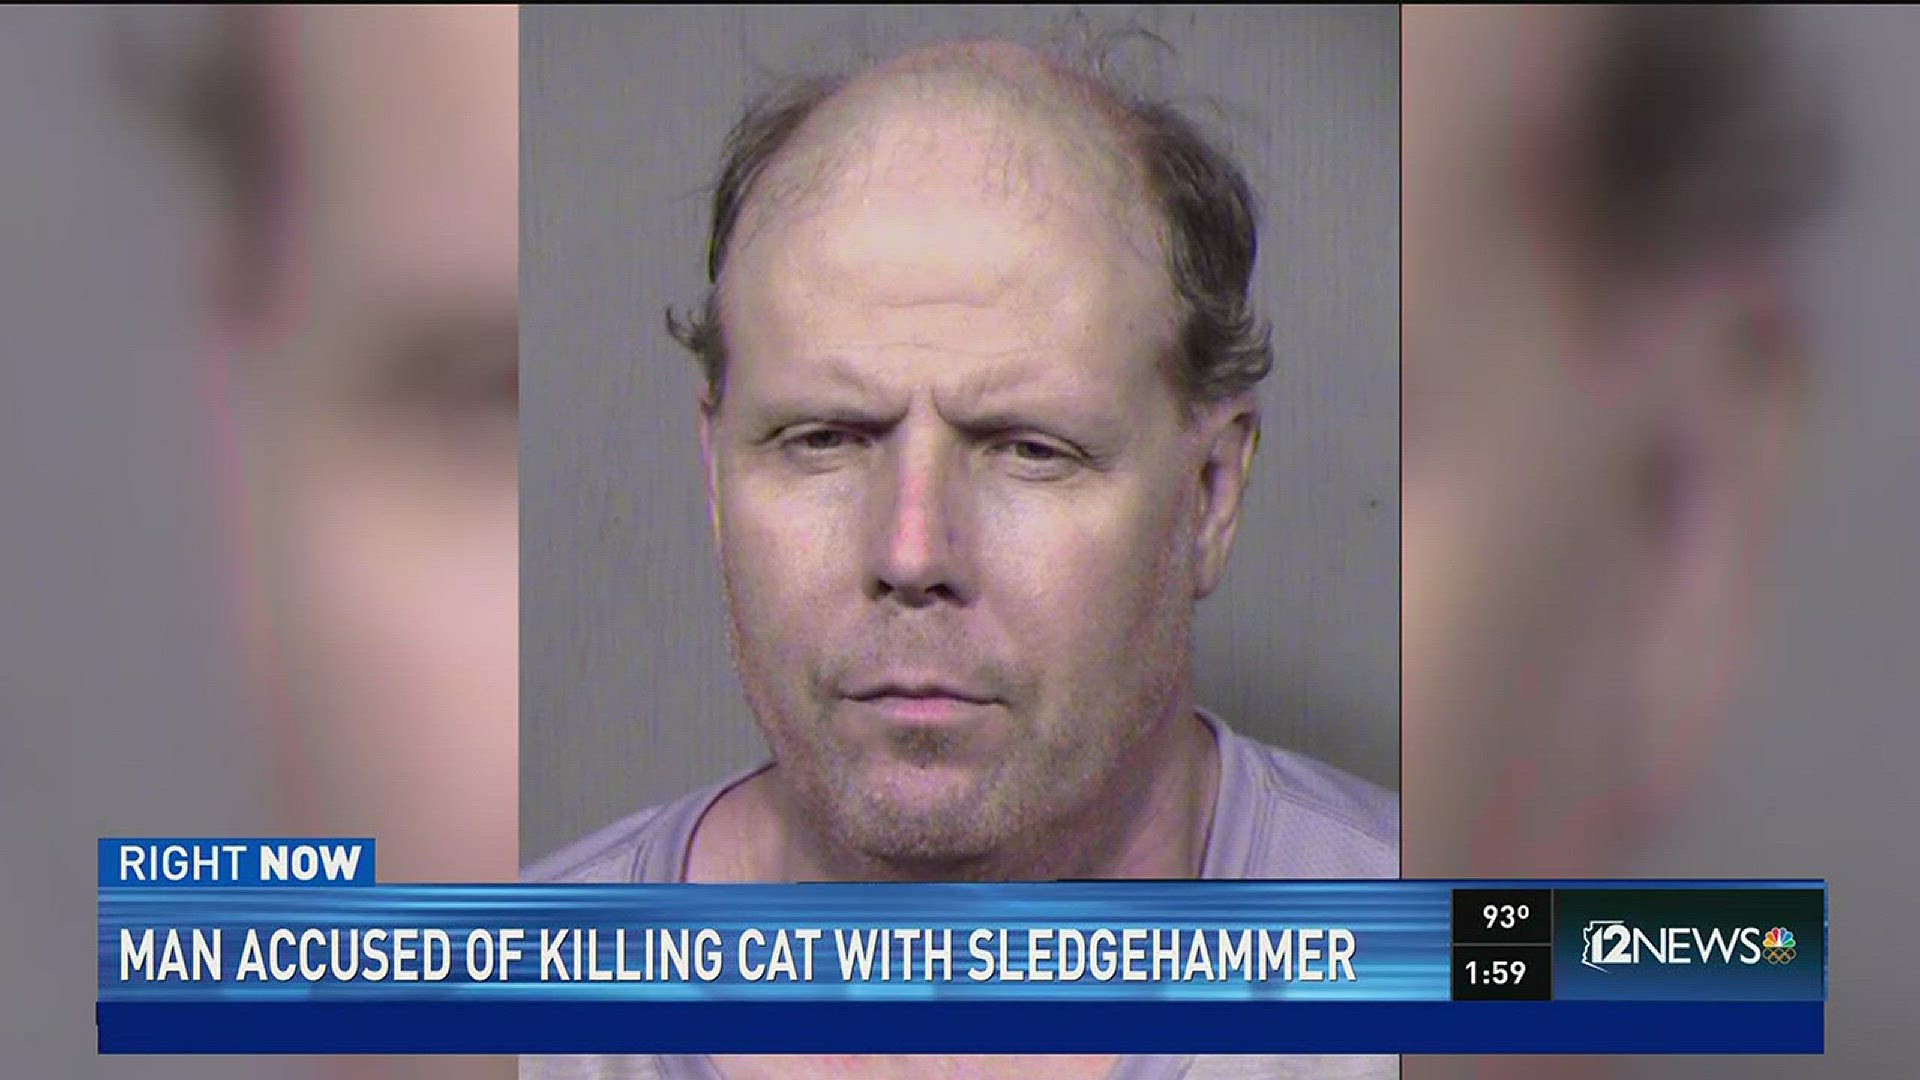 Phoenix police said James Henry Fox allegedly killed his cat in his driveway on Wednesday.